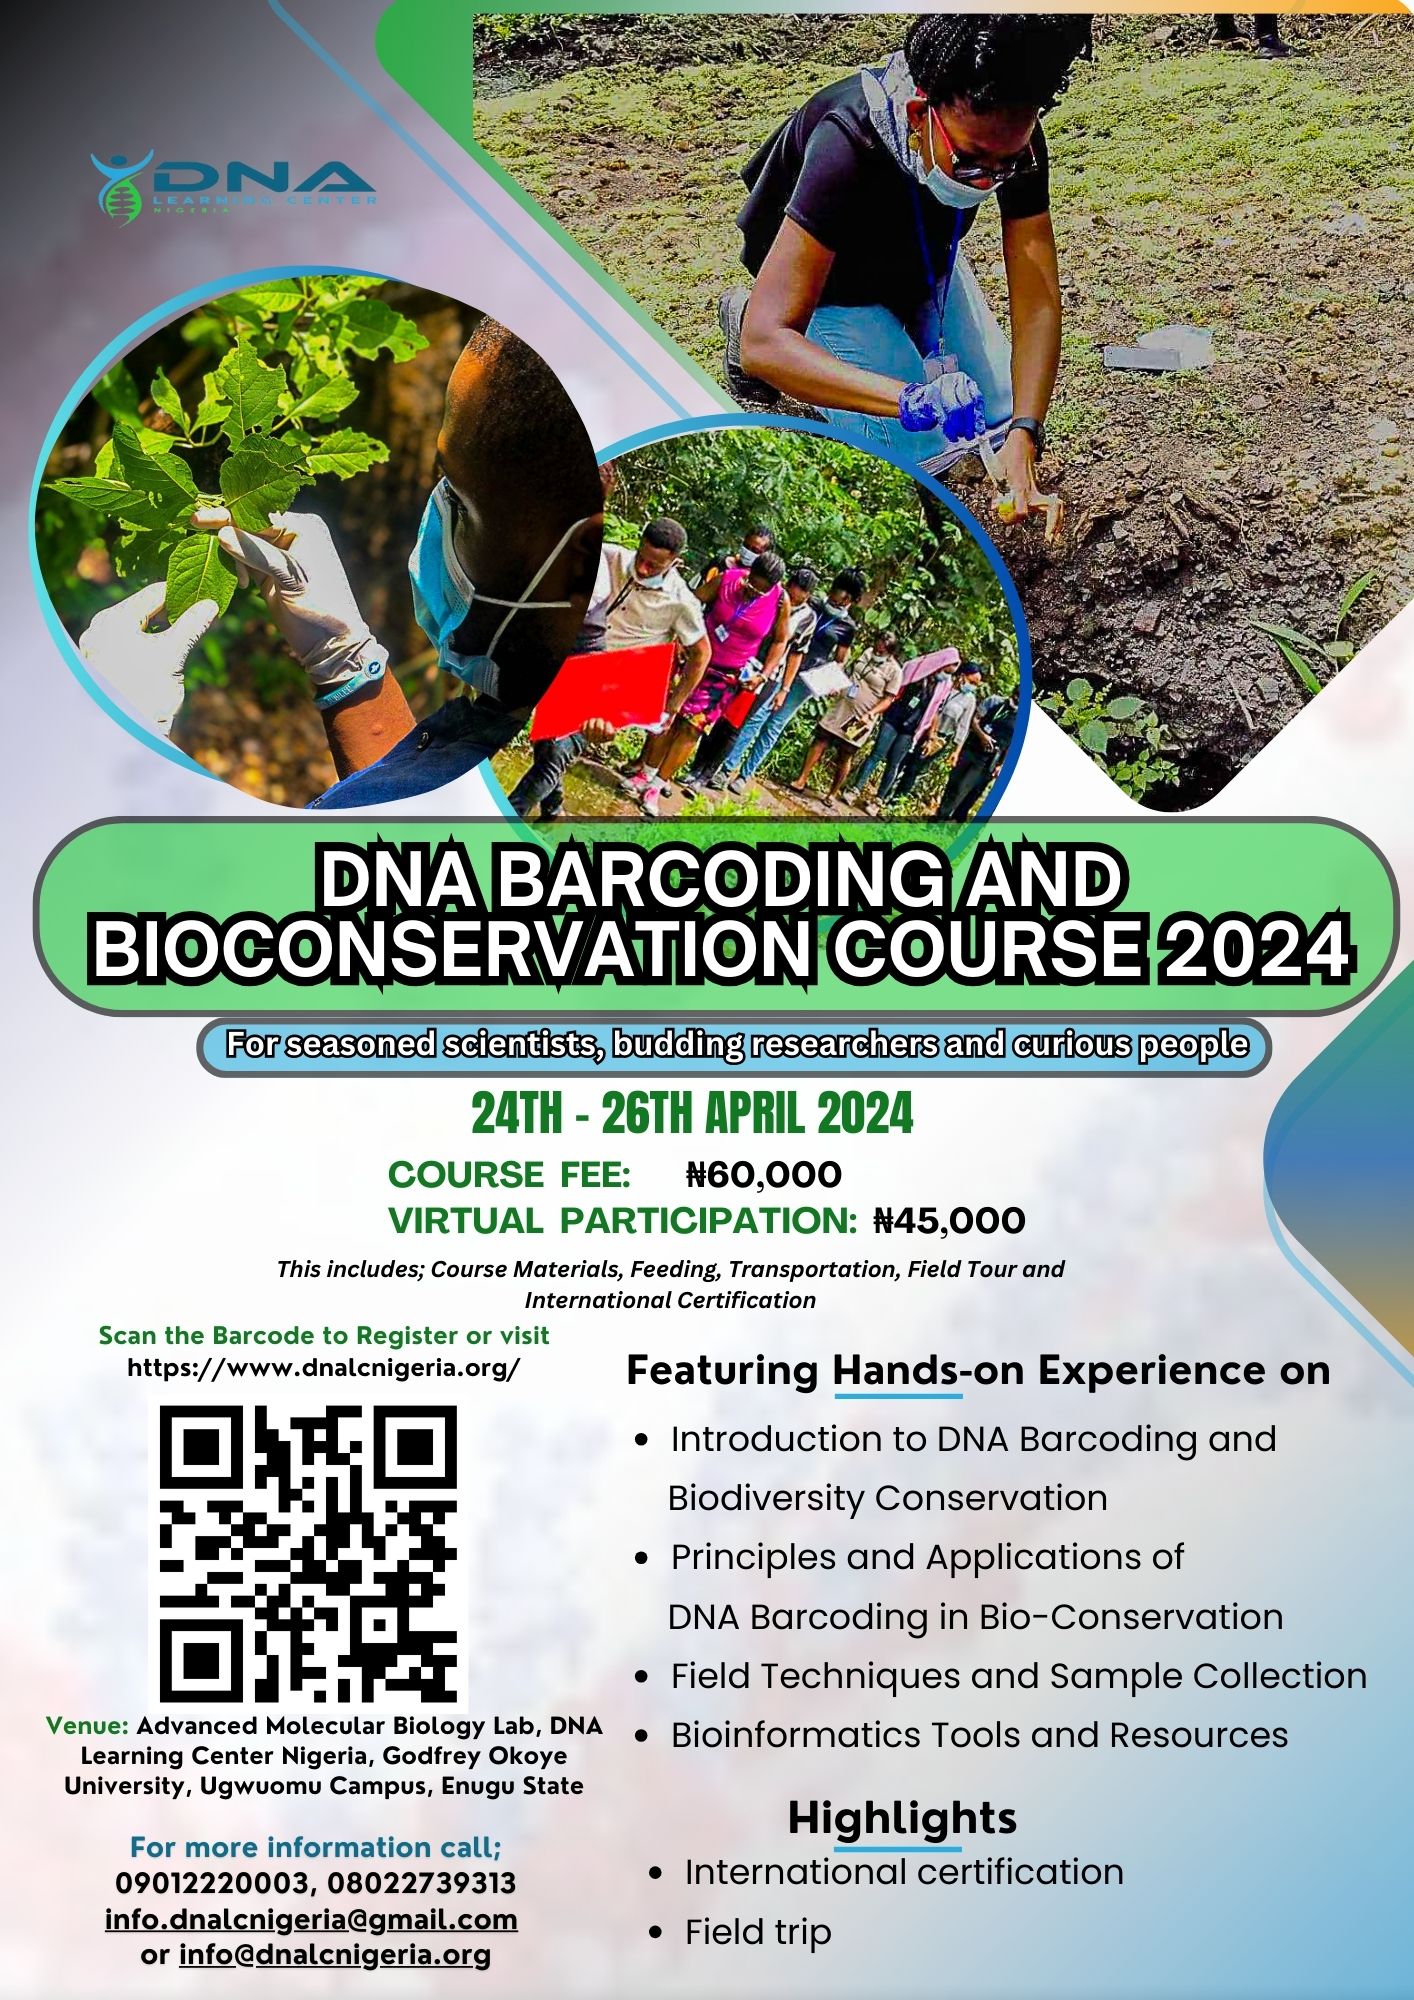 DNA barcoding and bioconservation course 2024